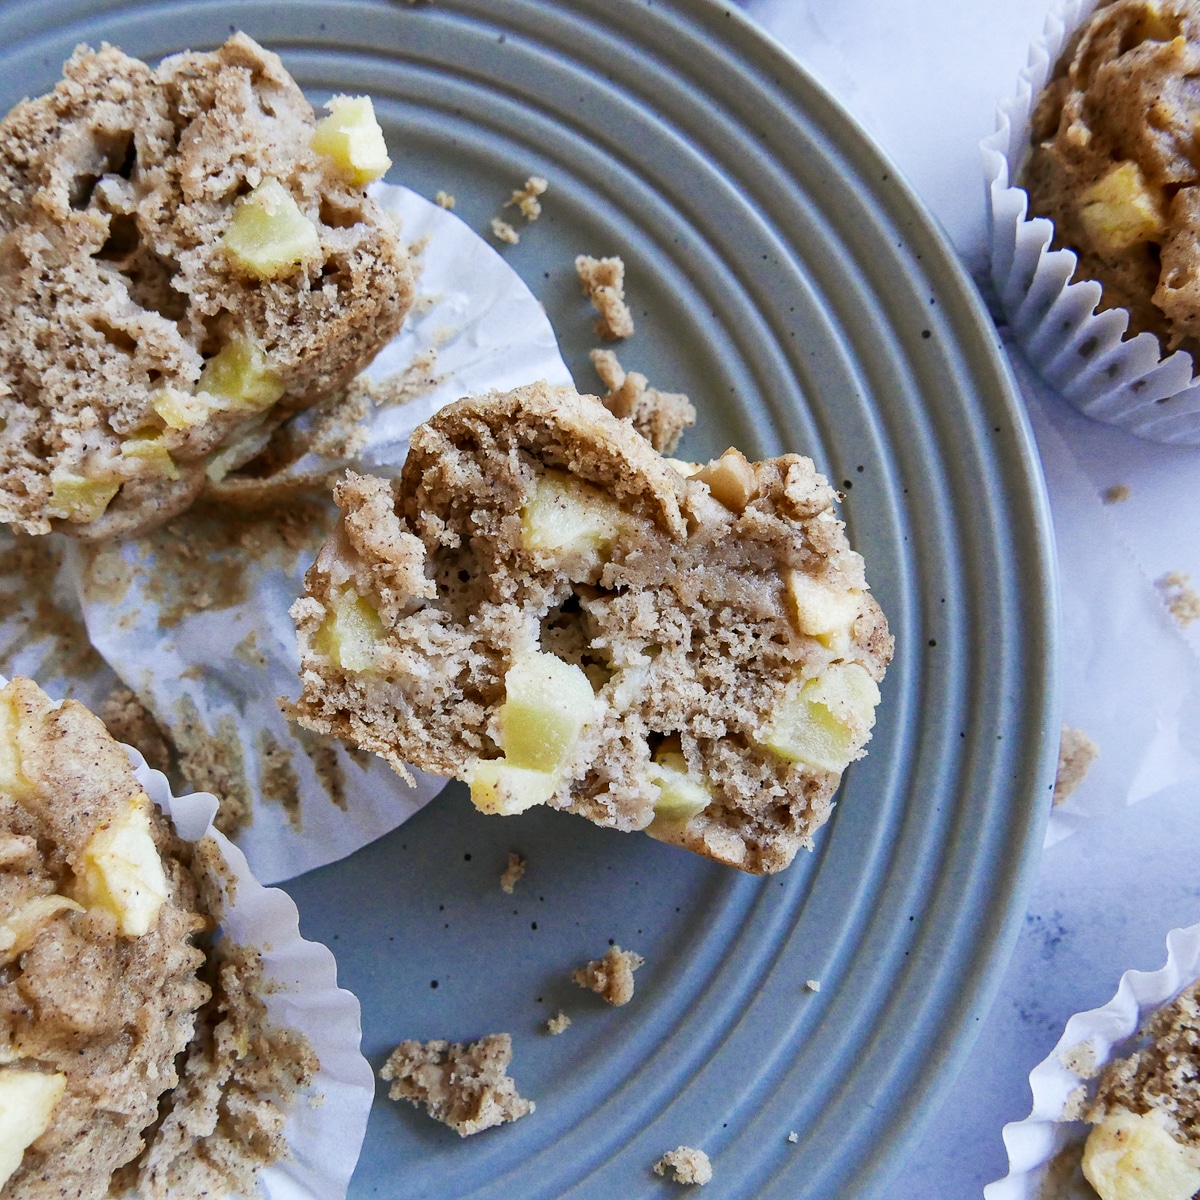 Gluten free apple muffins cut open on a plate with crumbs.